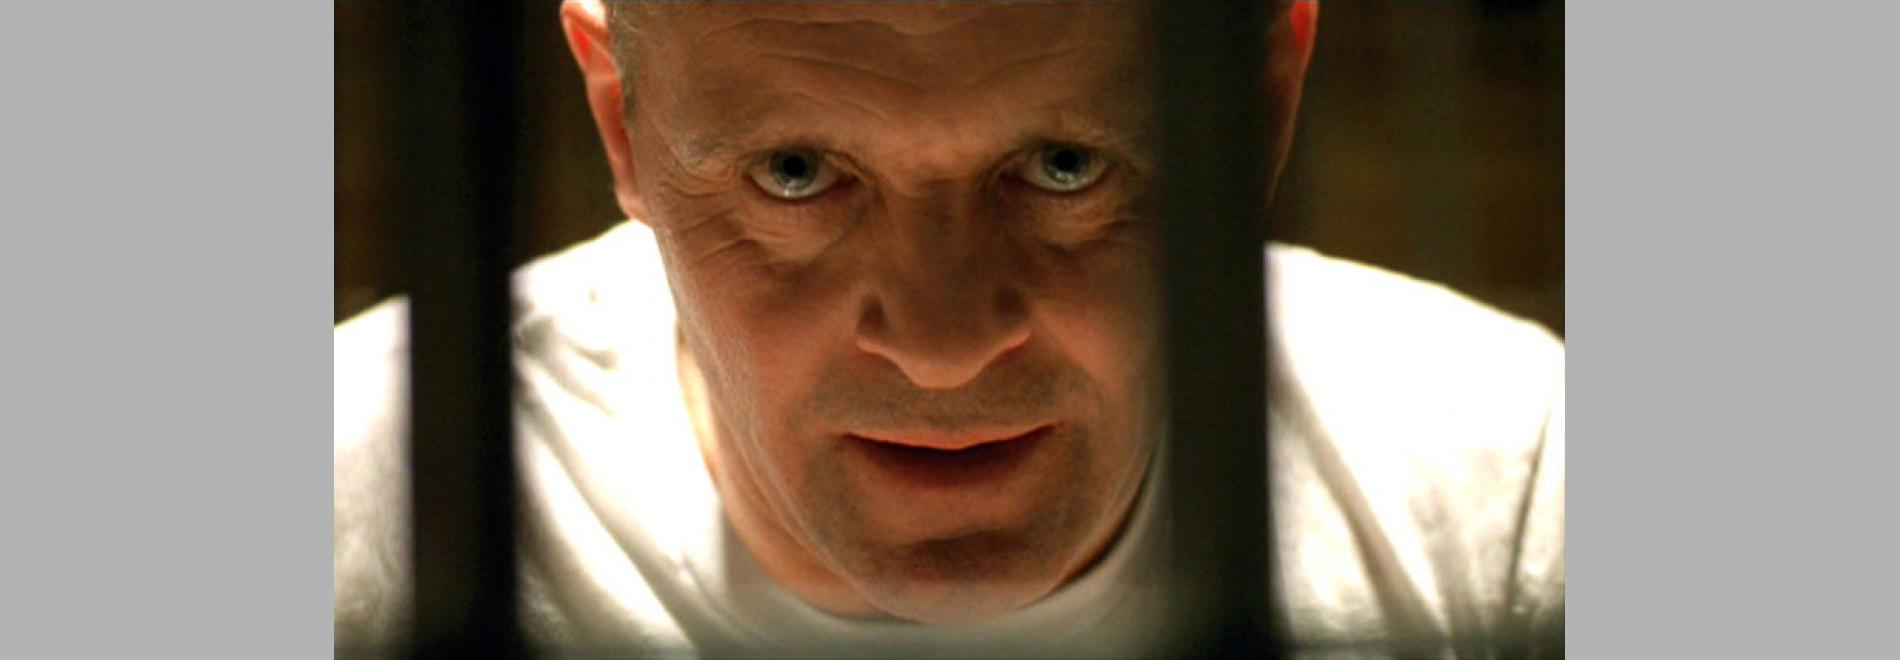 The Silence of the Lambs (Jonathan Demme, 1990)